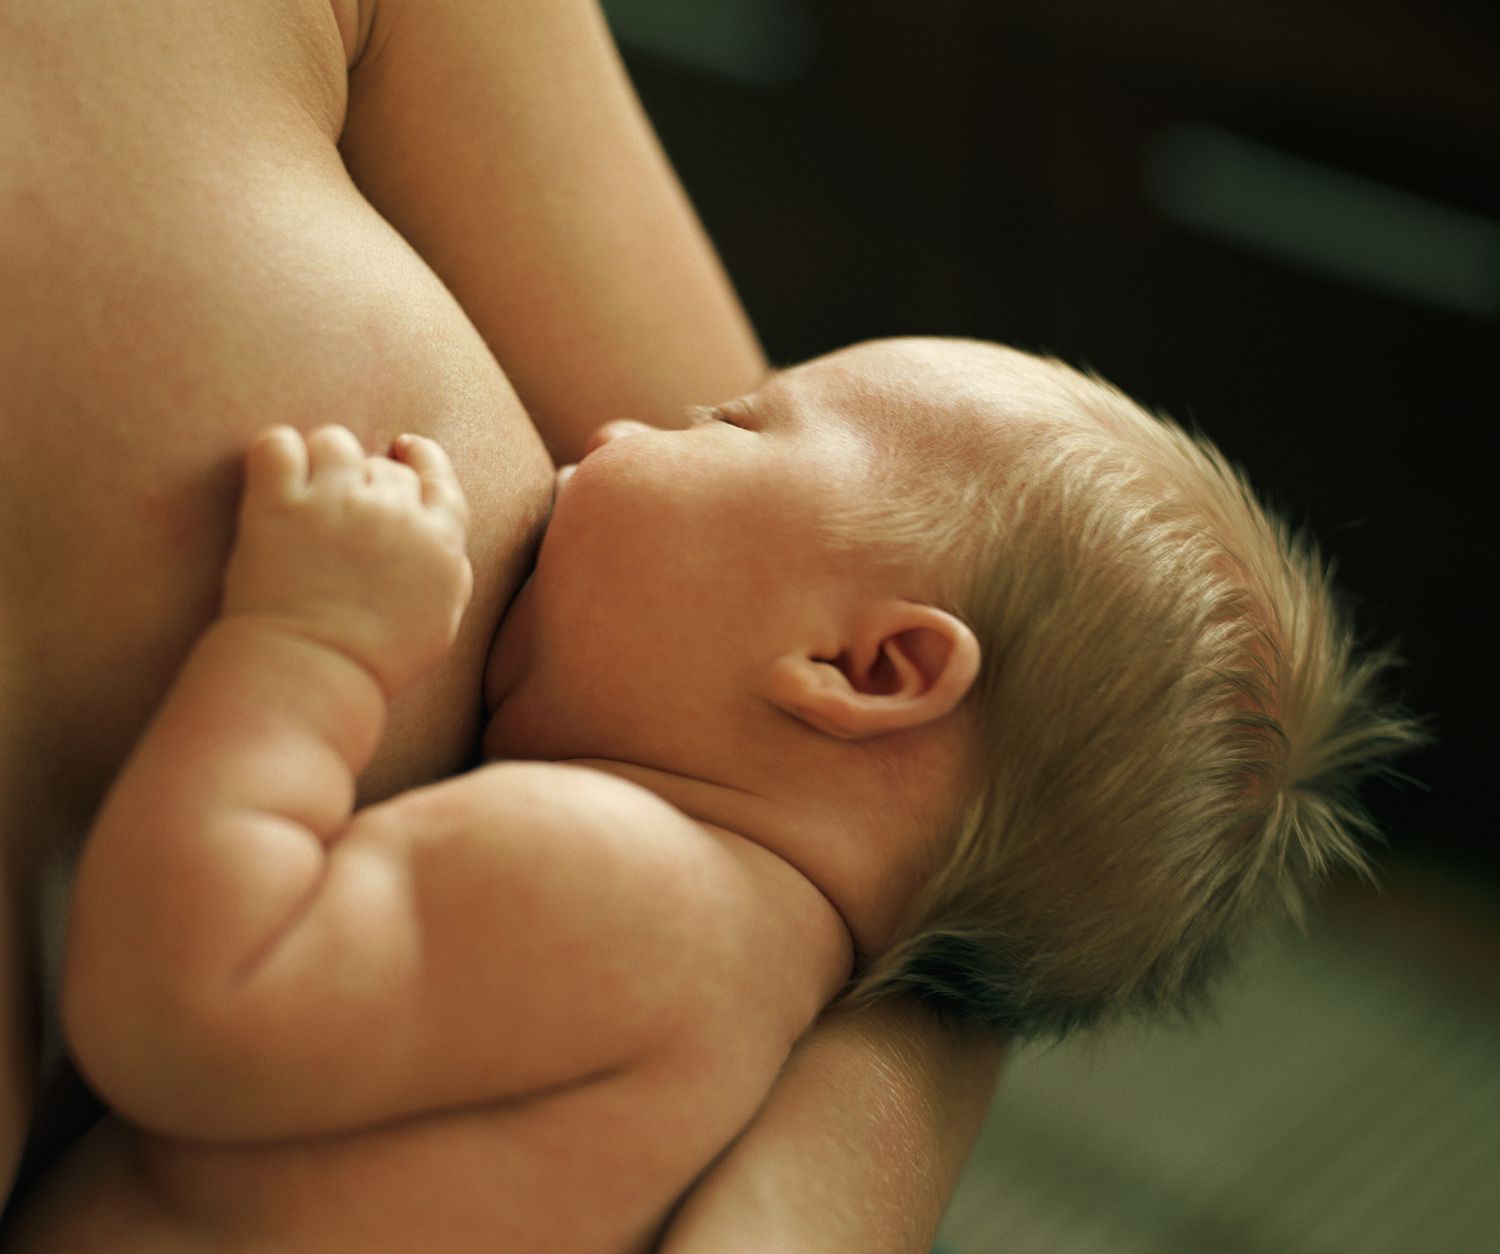 An image of a mother breastfeeding.